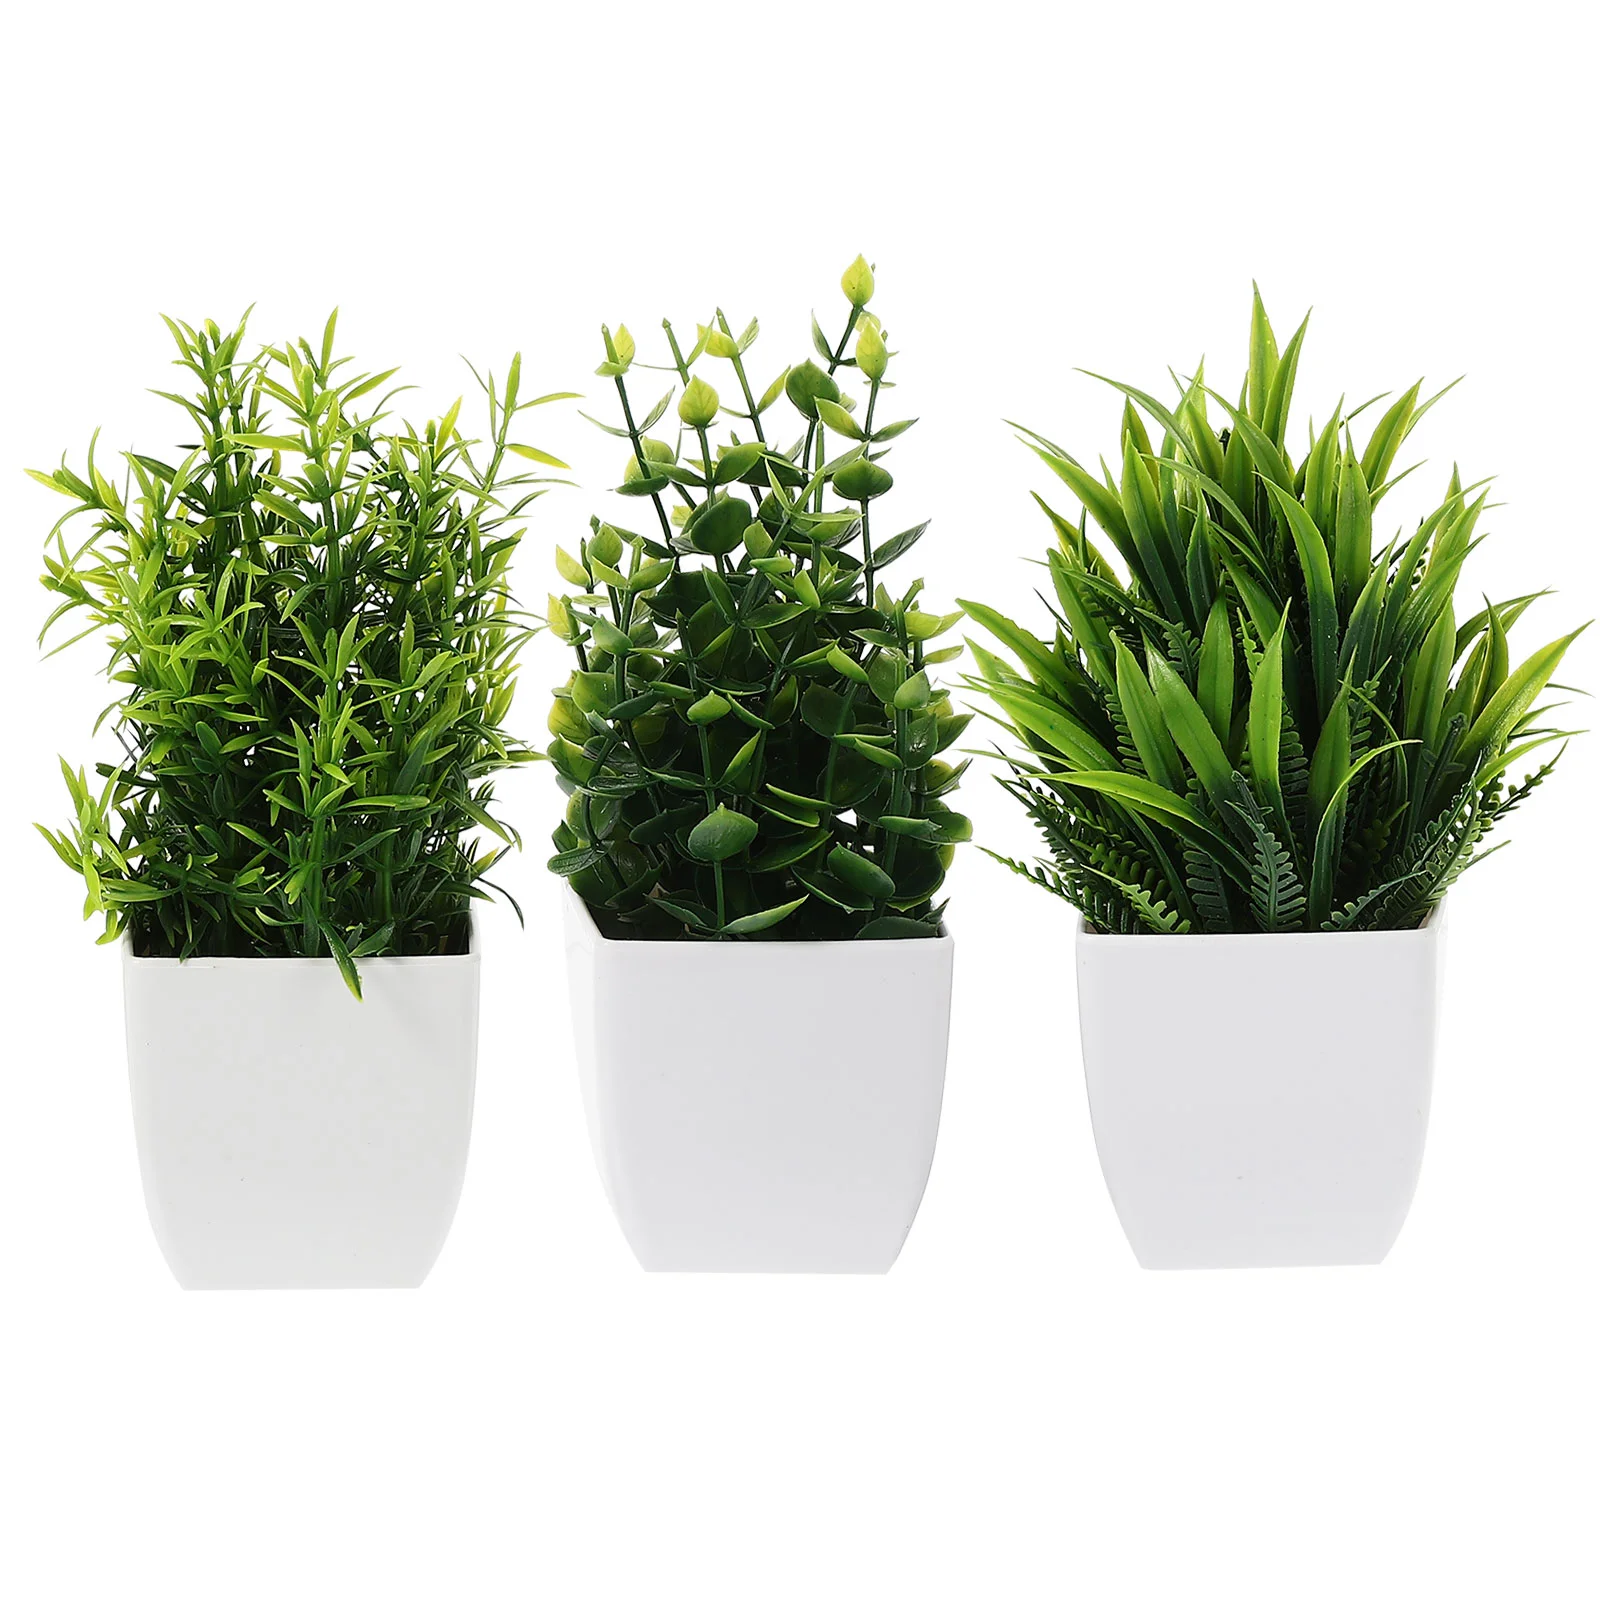 

3 Pcs Simulated Potted Plant Artificial Indoor Plants Bonsai Adornments Small Decor Fake Desktop Pp Faux Office